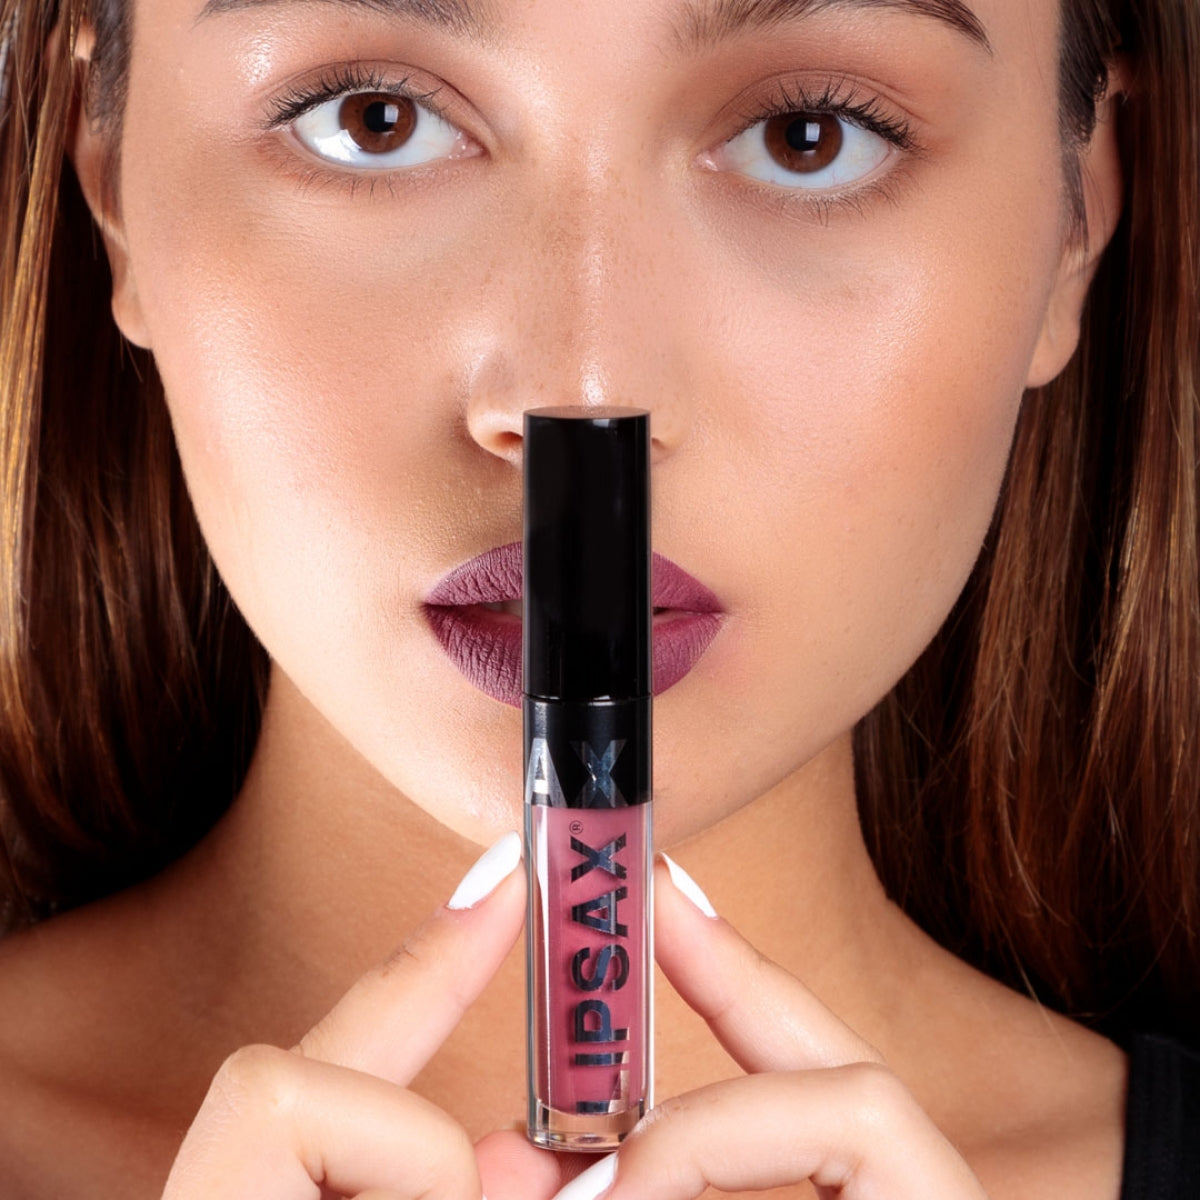 A model holding LIPSAX in front of her lips